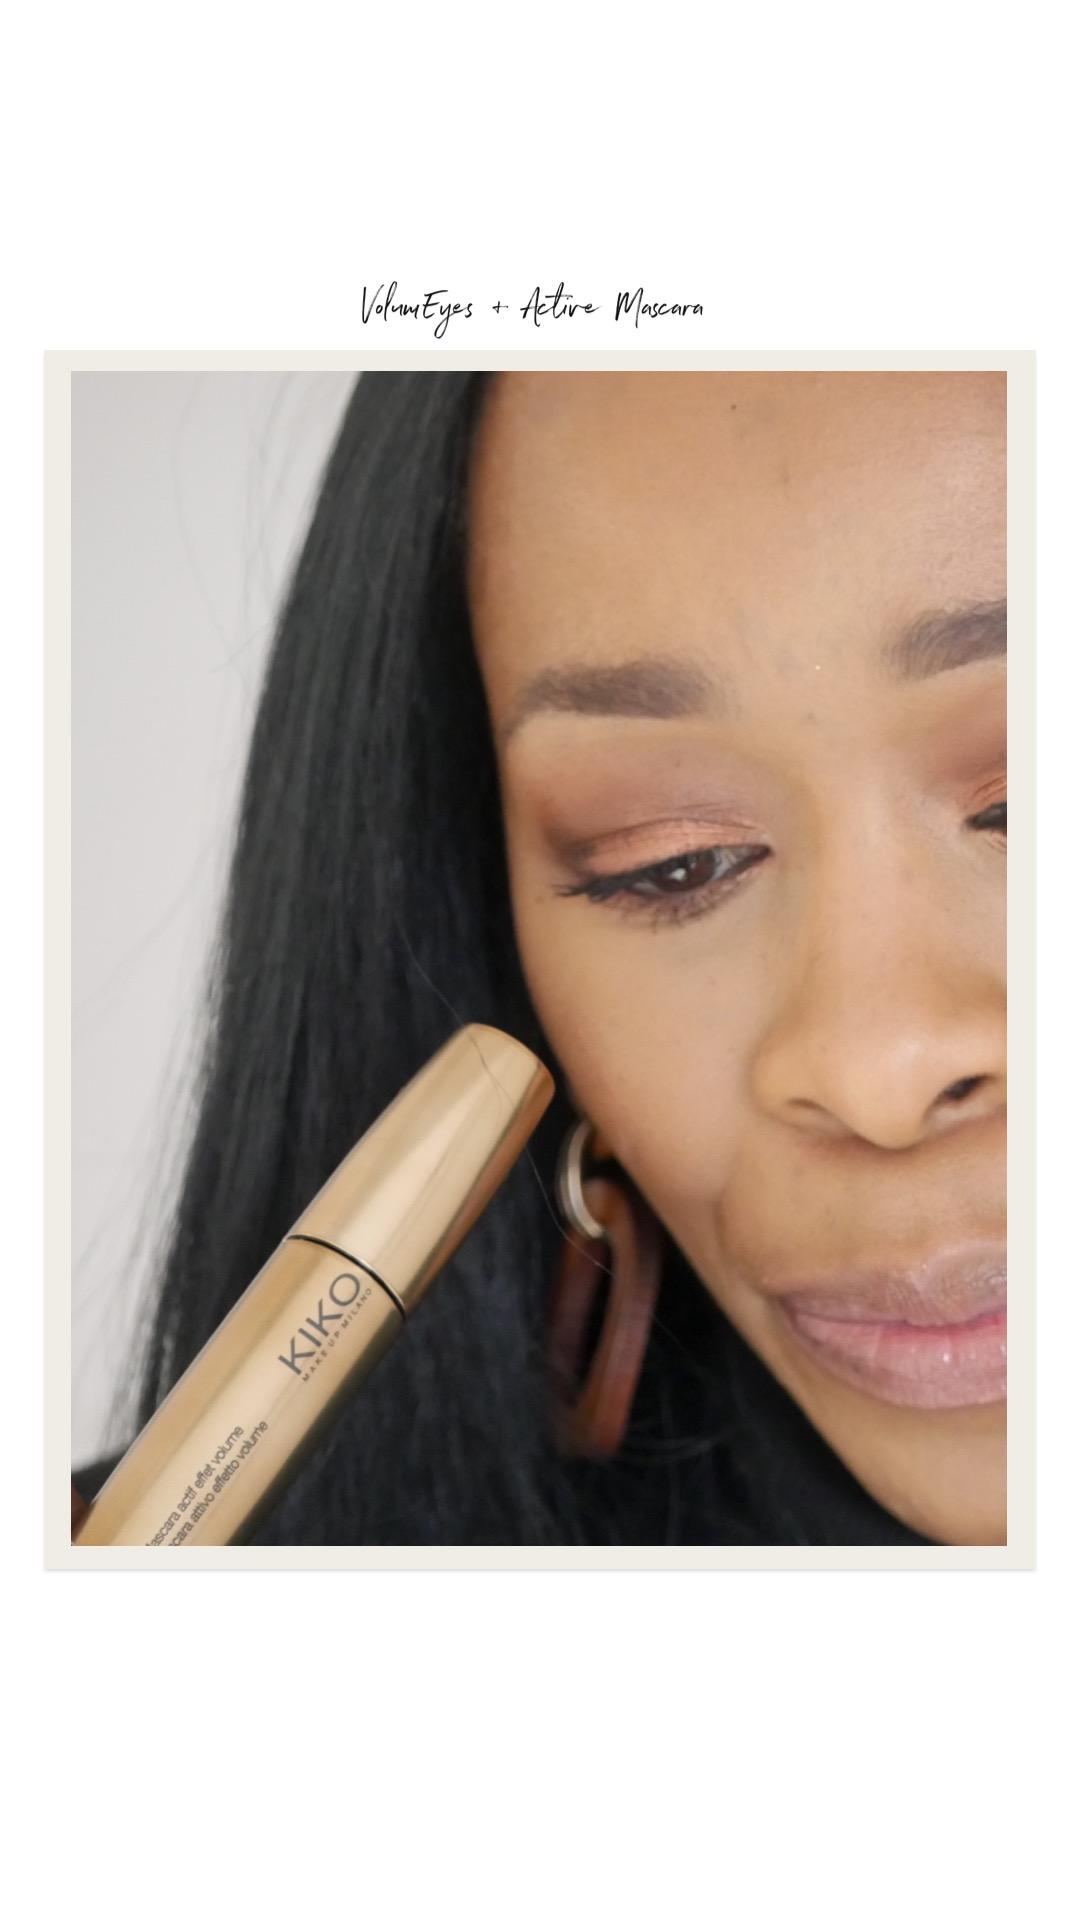 What I bought from KIKO Milano Online| My thoughts on everything I bought - all under £10 including this VolumEyes+Mascara |If you're looking for cruelty free, affordable makeup and beauty, then you'll definitely be interested| www.kittyandb.com #KIKOTrendsetters #mascara #beautyreviews #crueltyfree #beautyblog #crueltyfreemascara